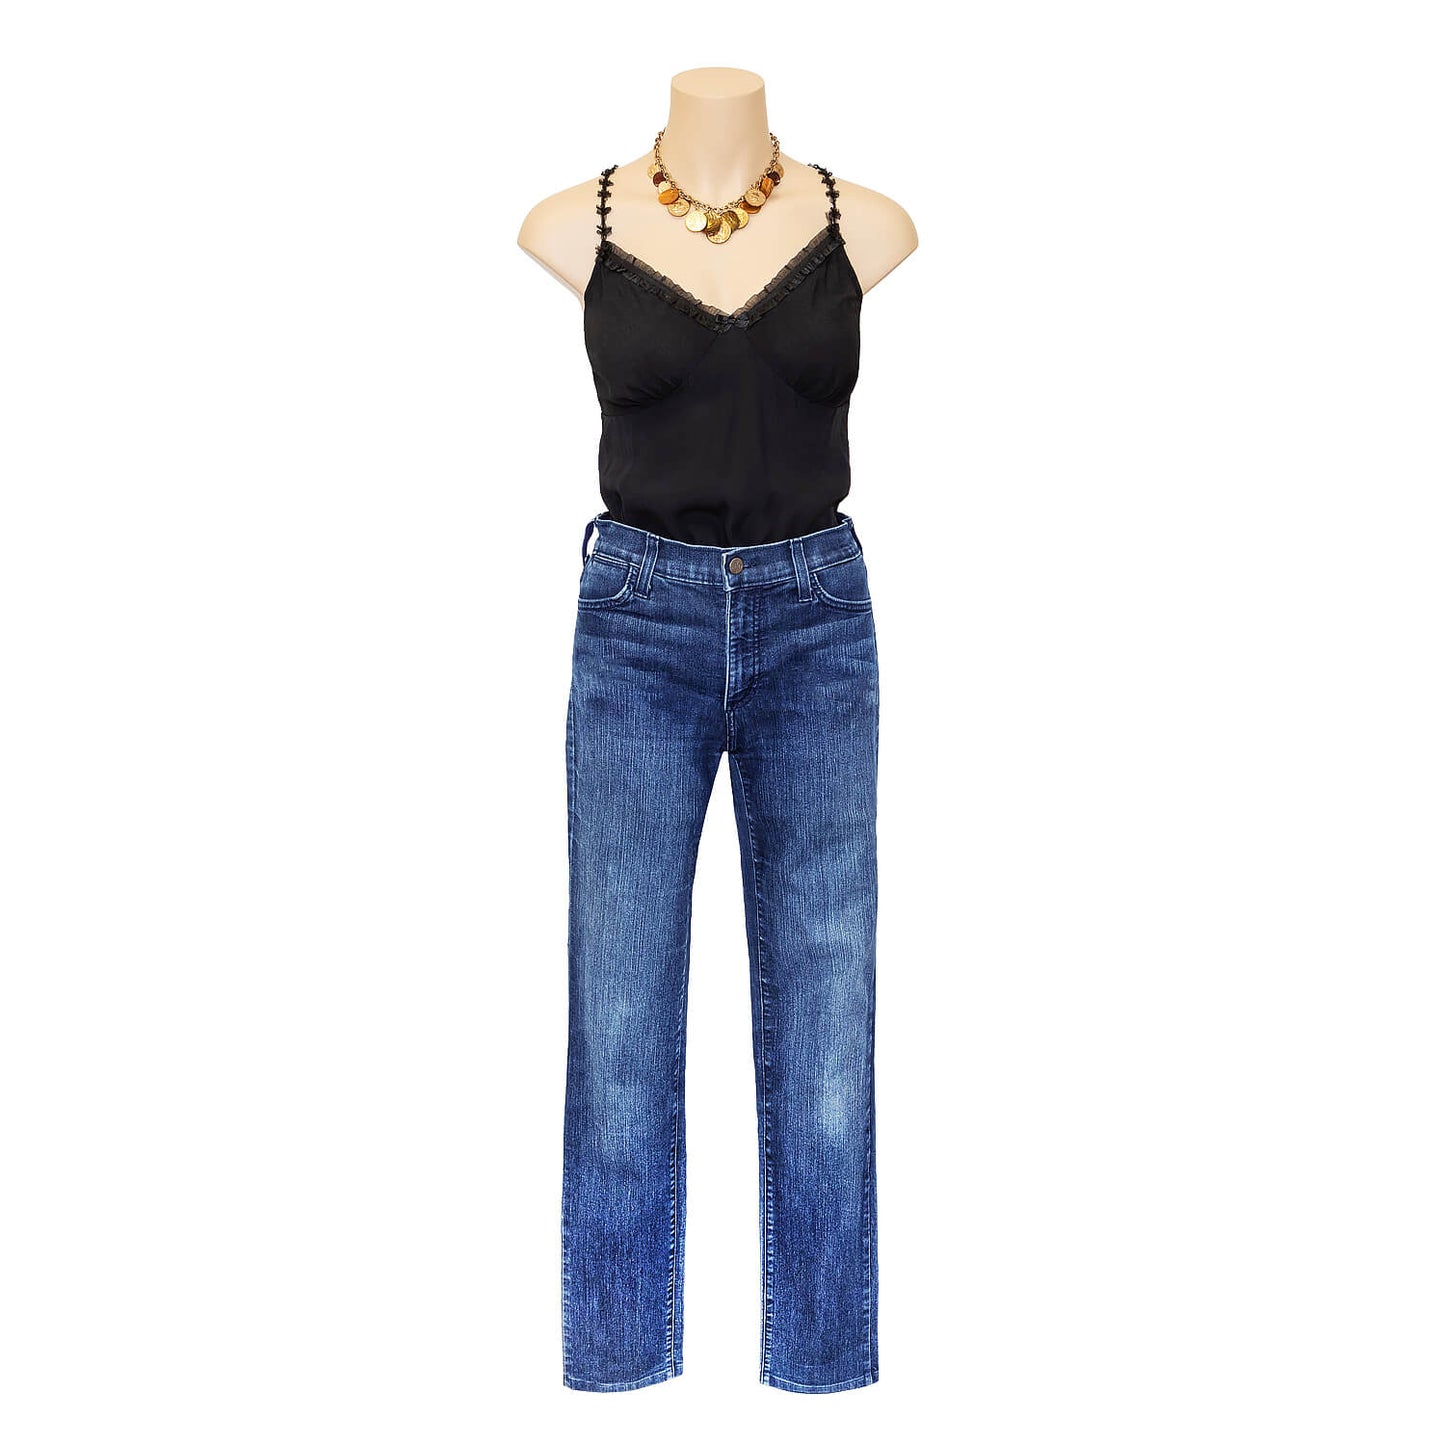 ebony black camisole with blue jeans